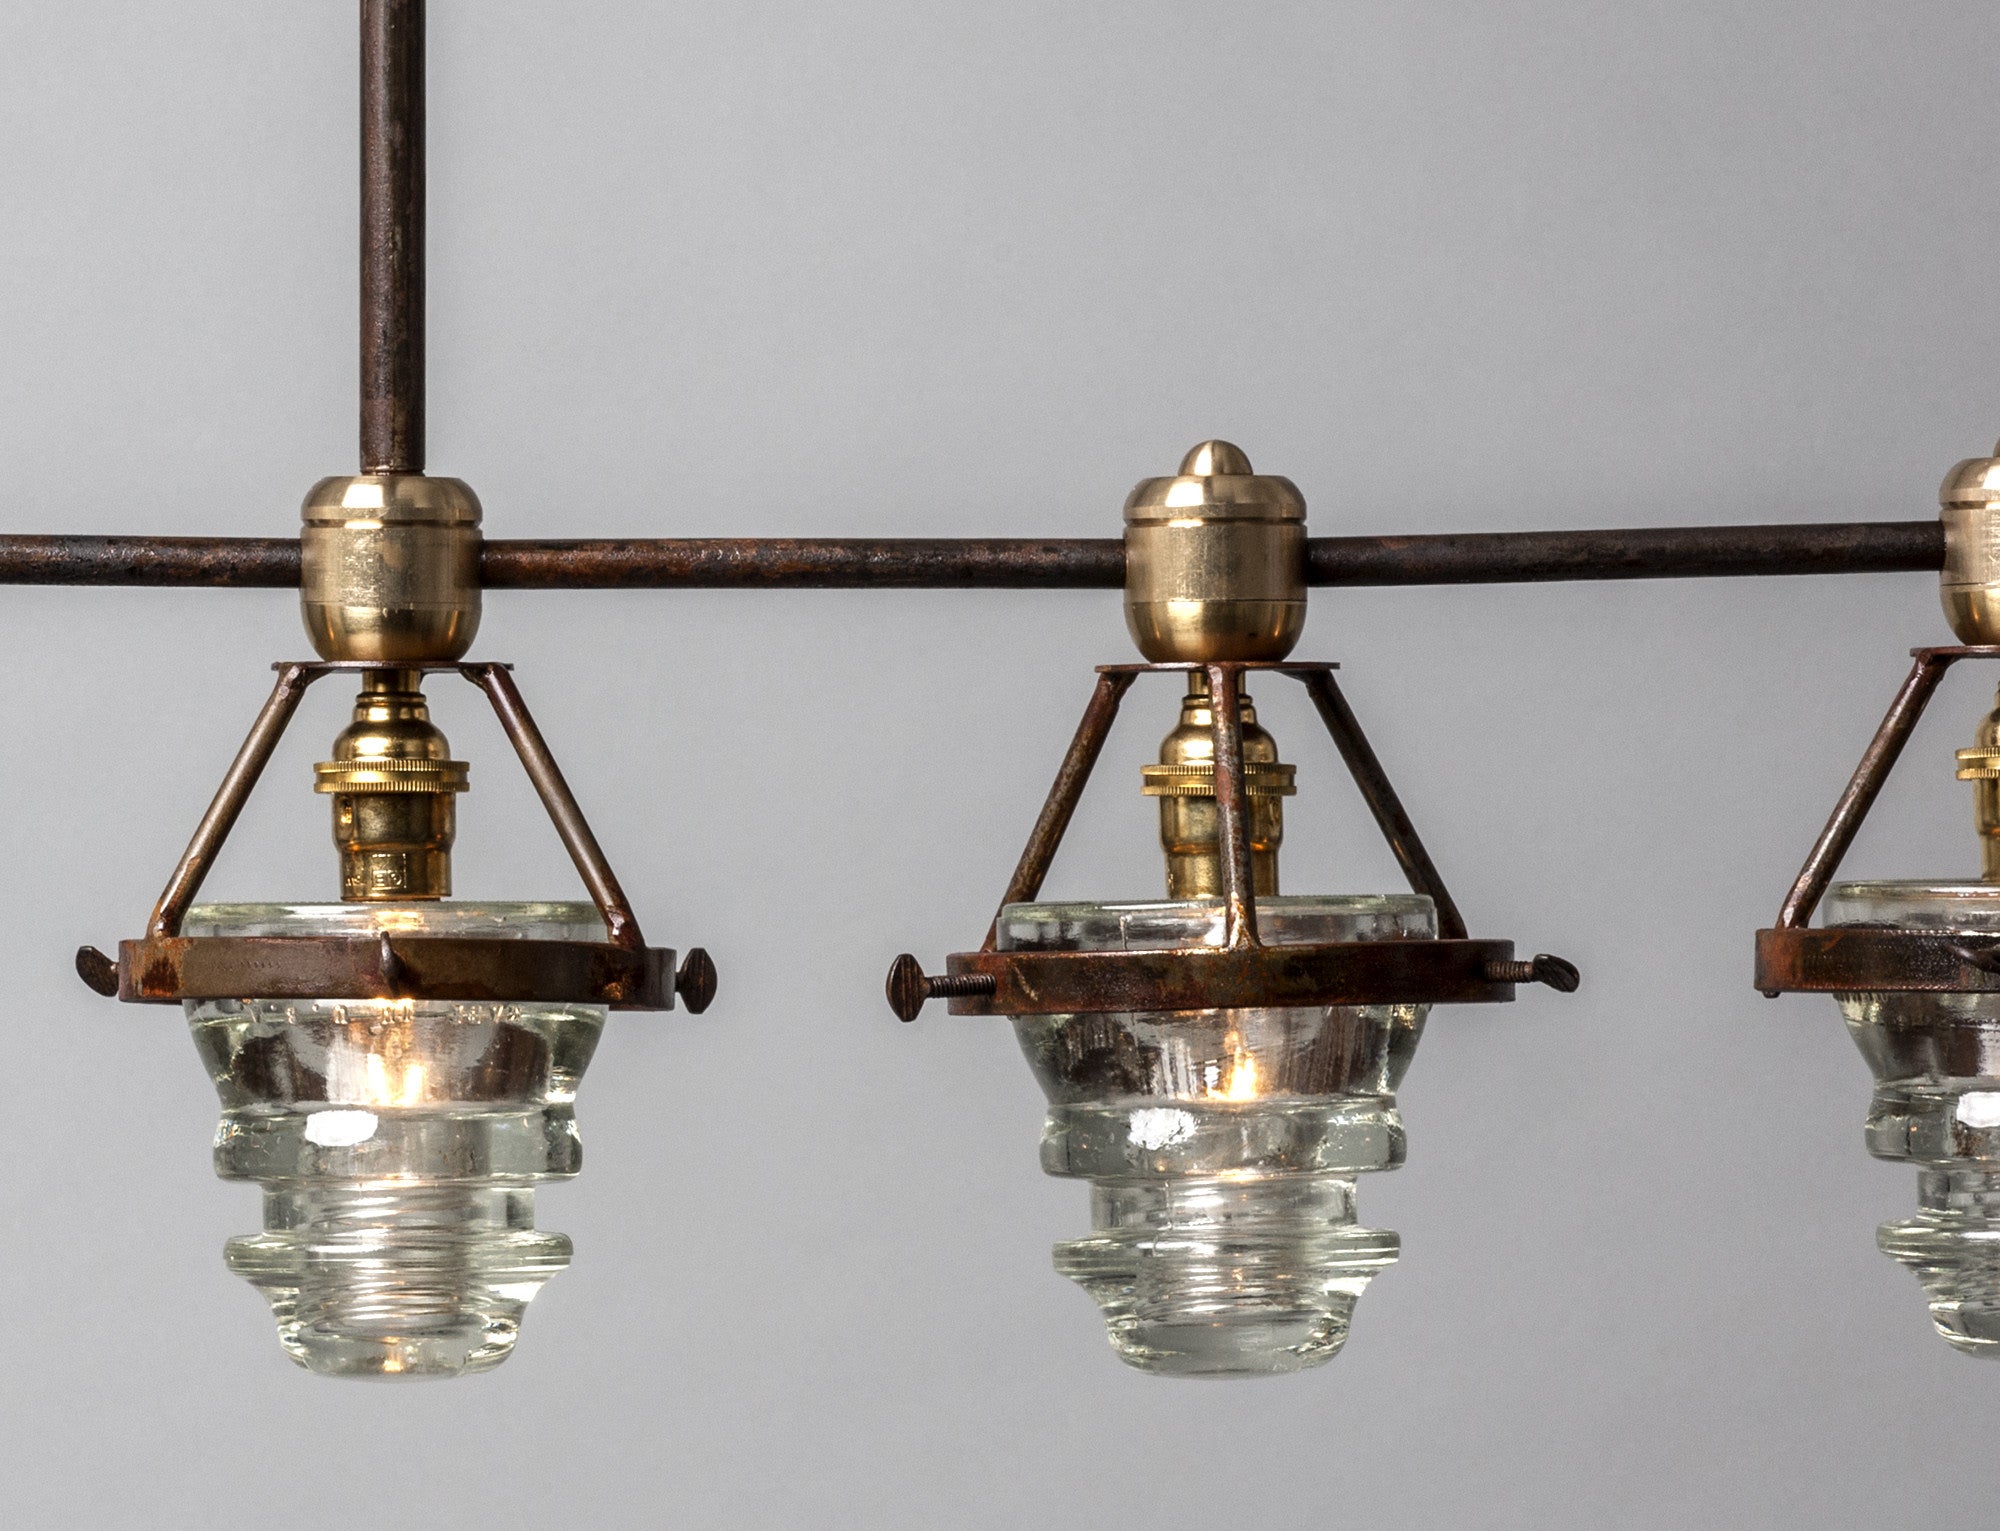 A Telegraph Pendant Lighting with four glass shades and antique insulators hanging from a brass frame. (Brand Name: Hester &amp; Cook)